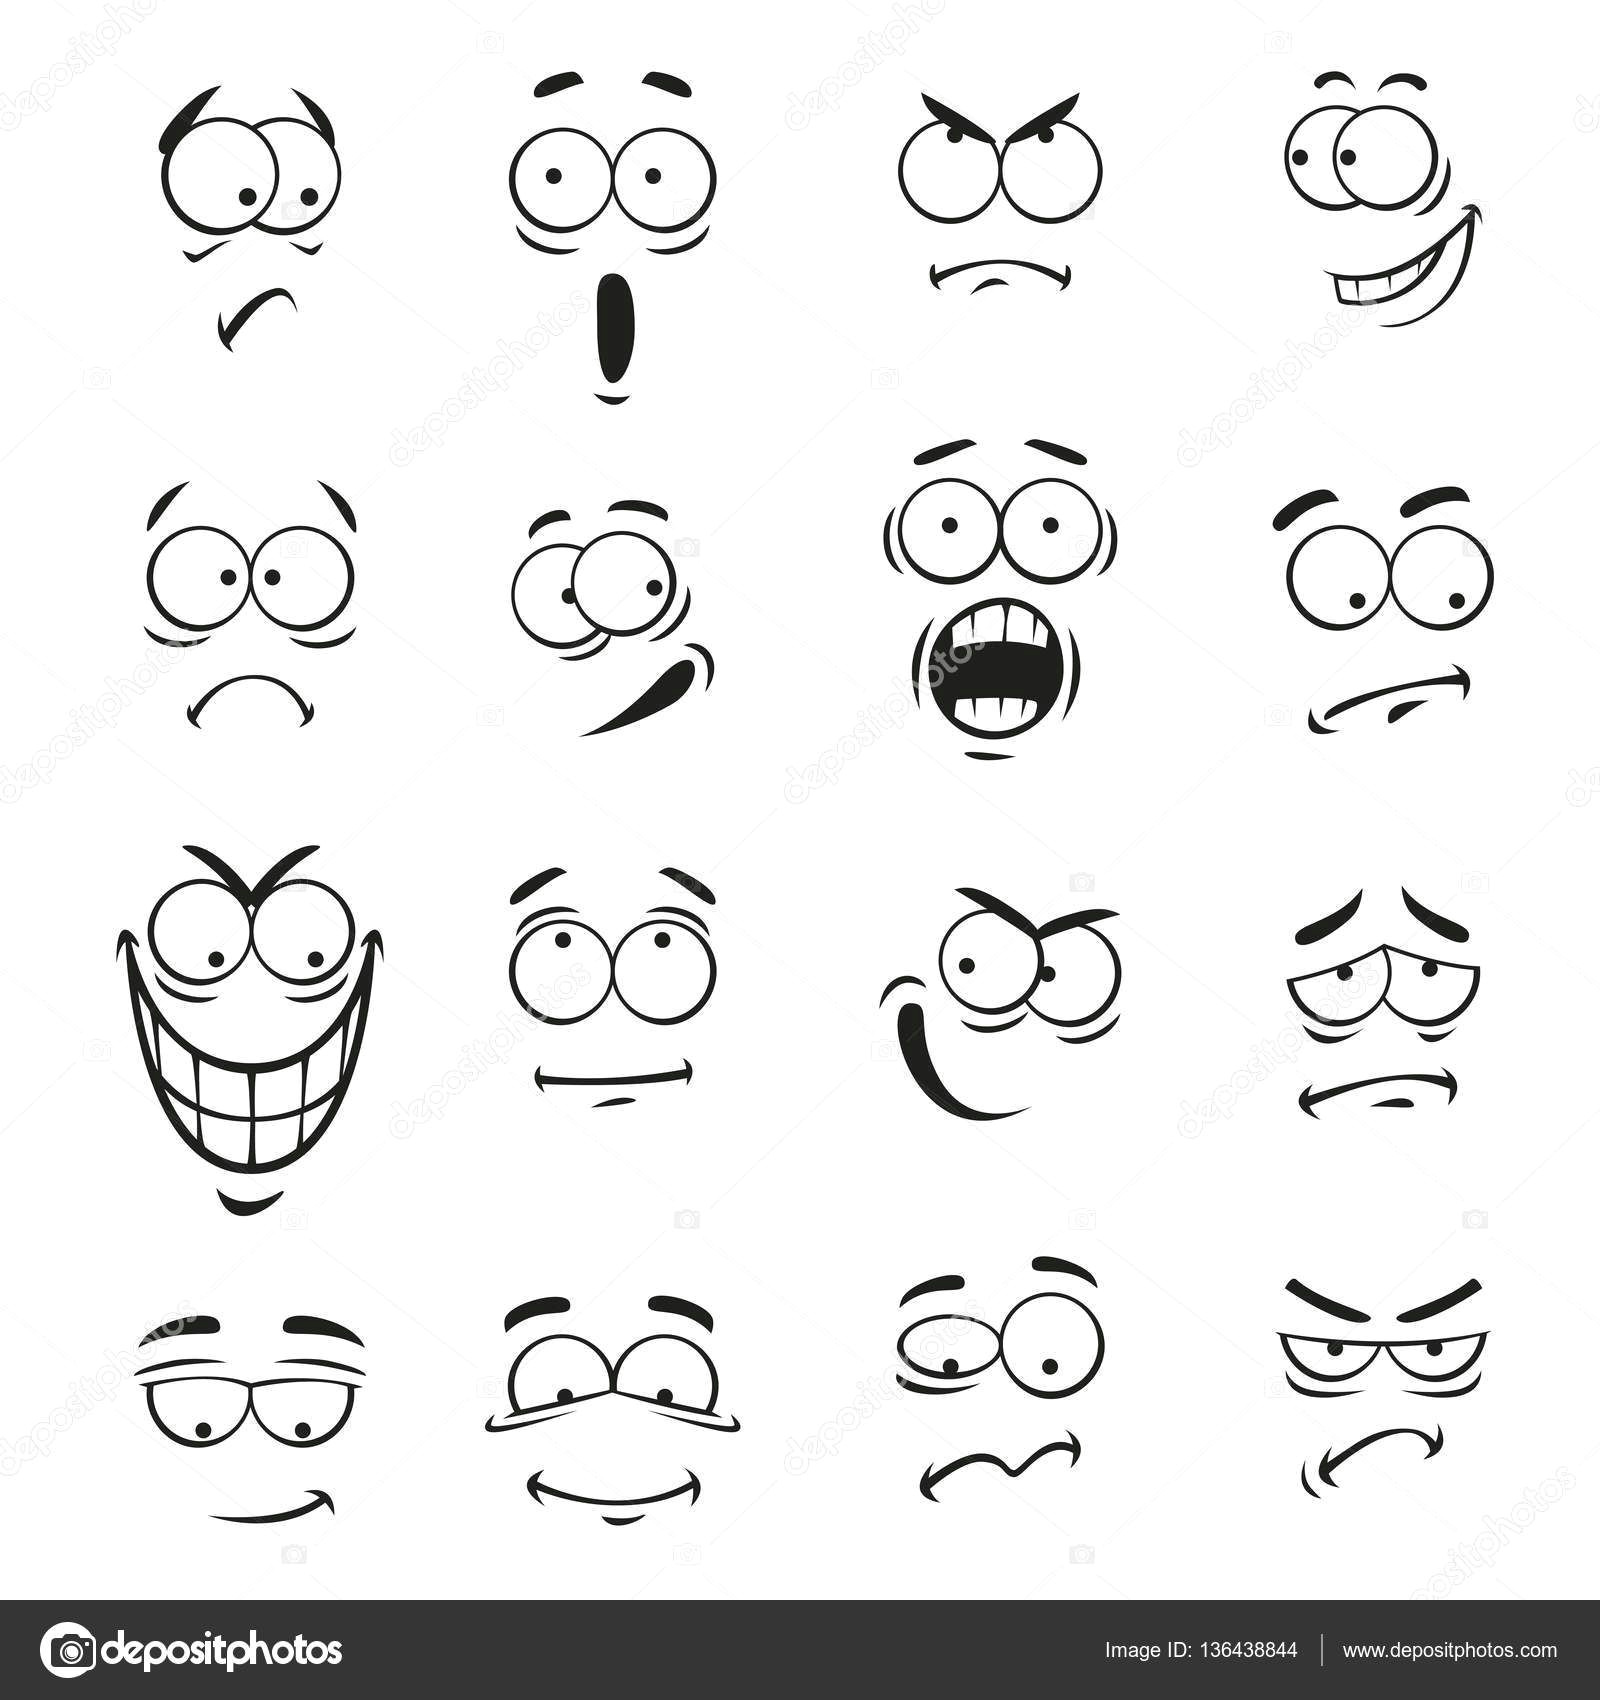 Drawing Of Heart Eyes Emoji Related Image Character X Press Cartoon Emoticon Emoticon Faces